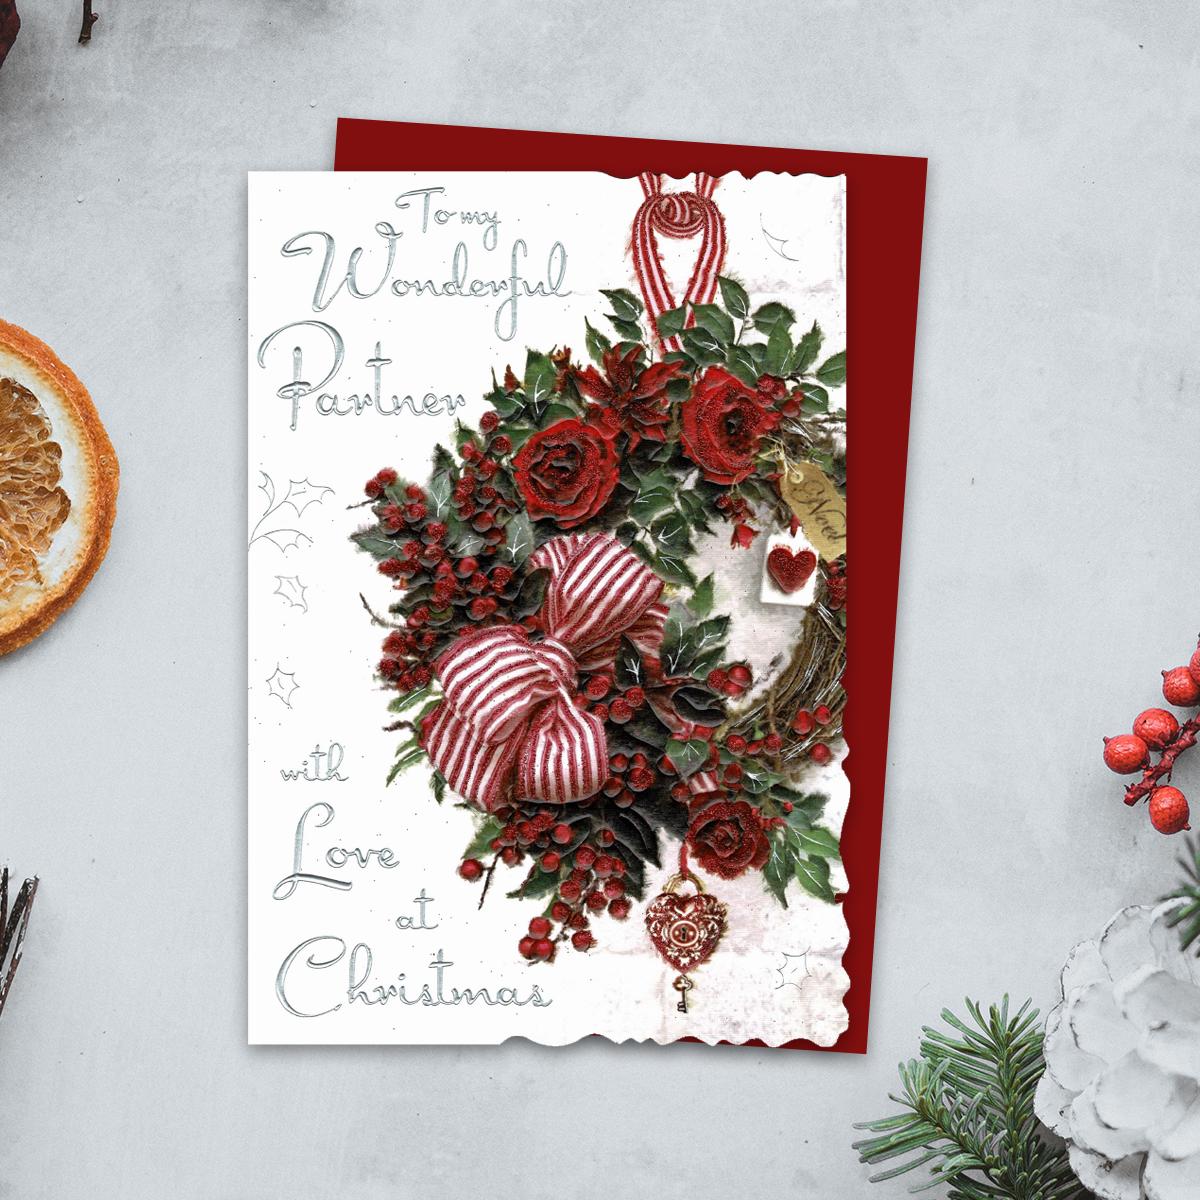 To My Wonderful Partner With Love At Christmas Featuring A Beautiful Festive Wreath Of Red Roses, Berries And Large Bow. Finished With Silver Foiled Lettering, Red Glitter Detail And Red Envelope